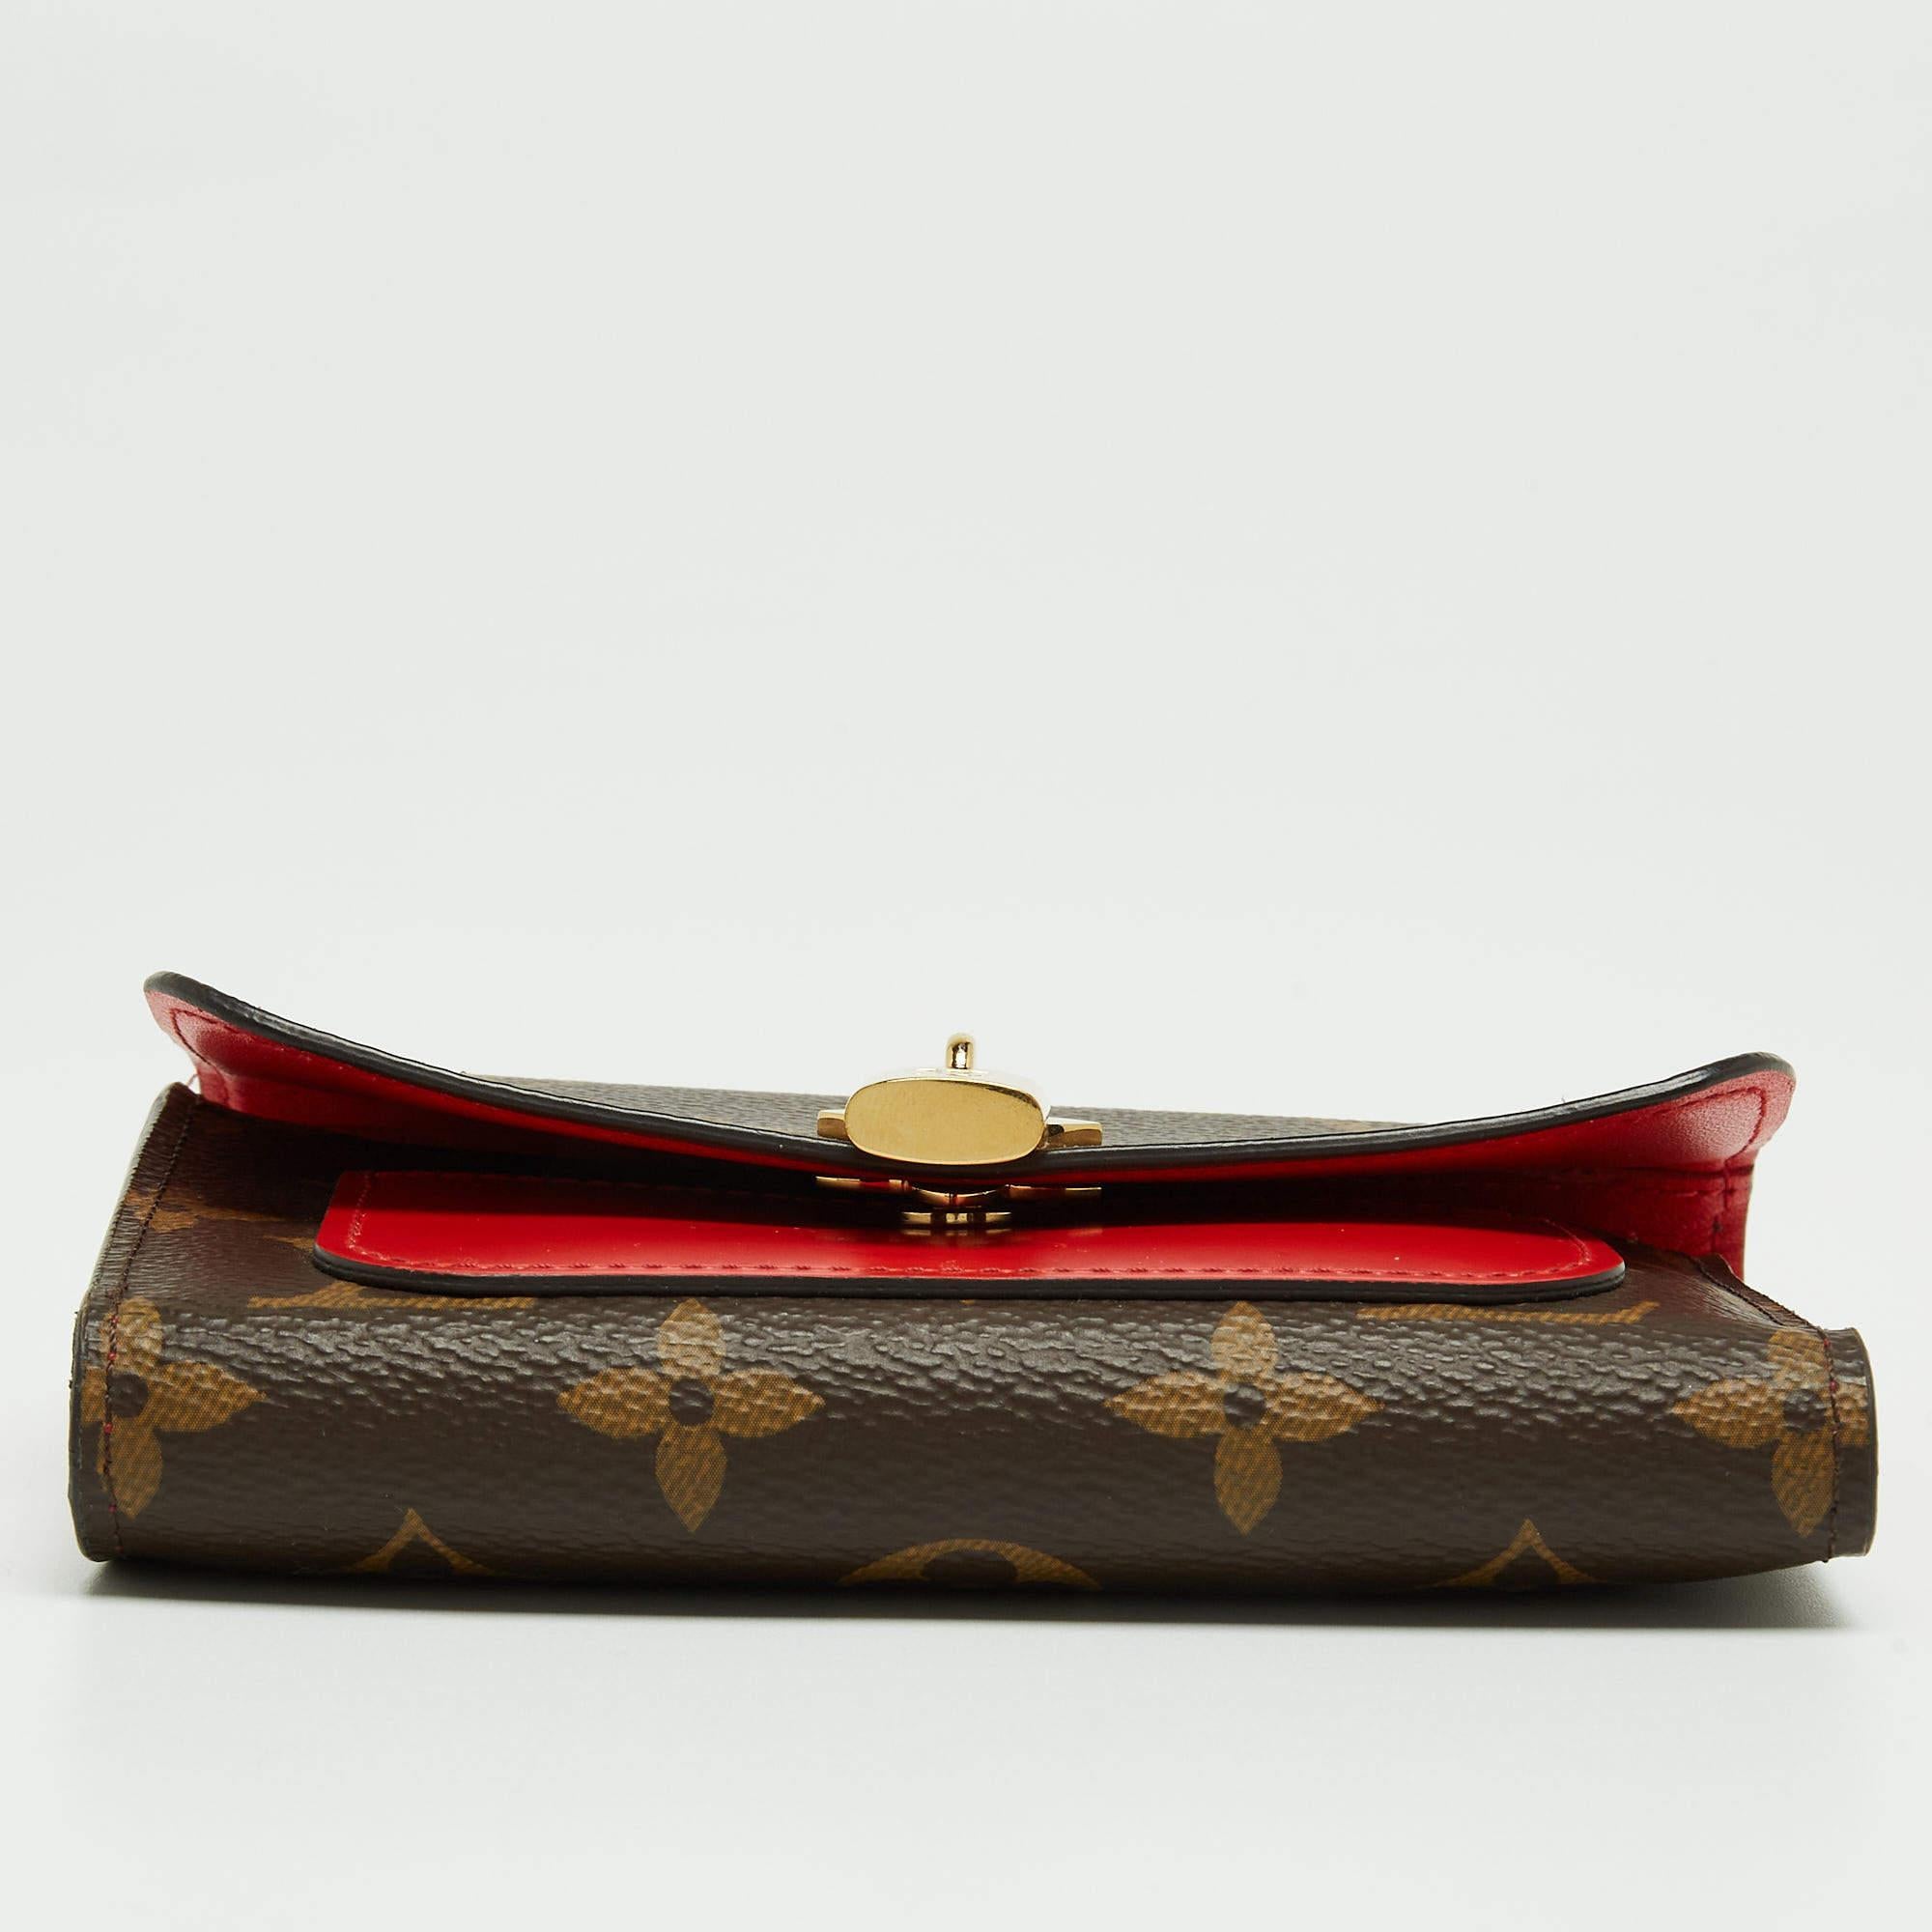 Crafted from the Monogram canvas, this Louis Vuitton wallet will add a statement appeal to your outfit. Its leather-lined interior is divided into different compartments for organized and safe storage of your monetary essentials.

